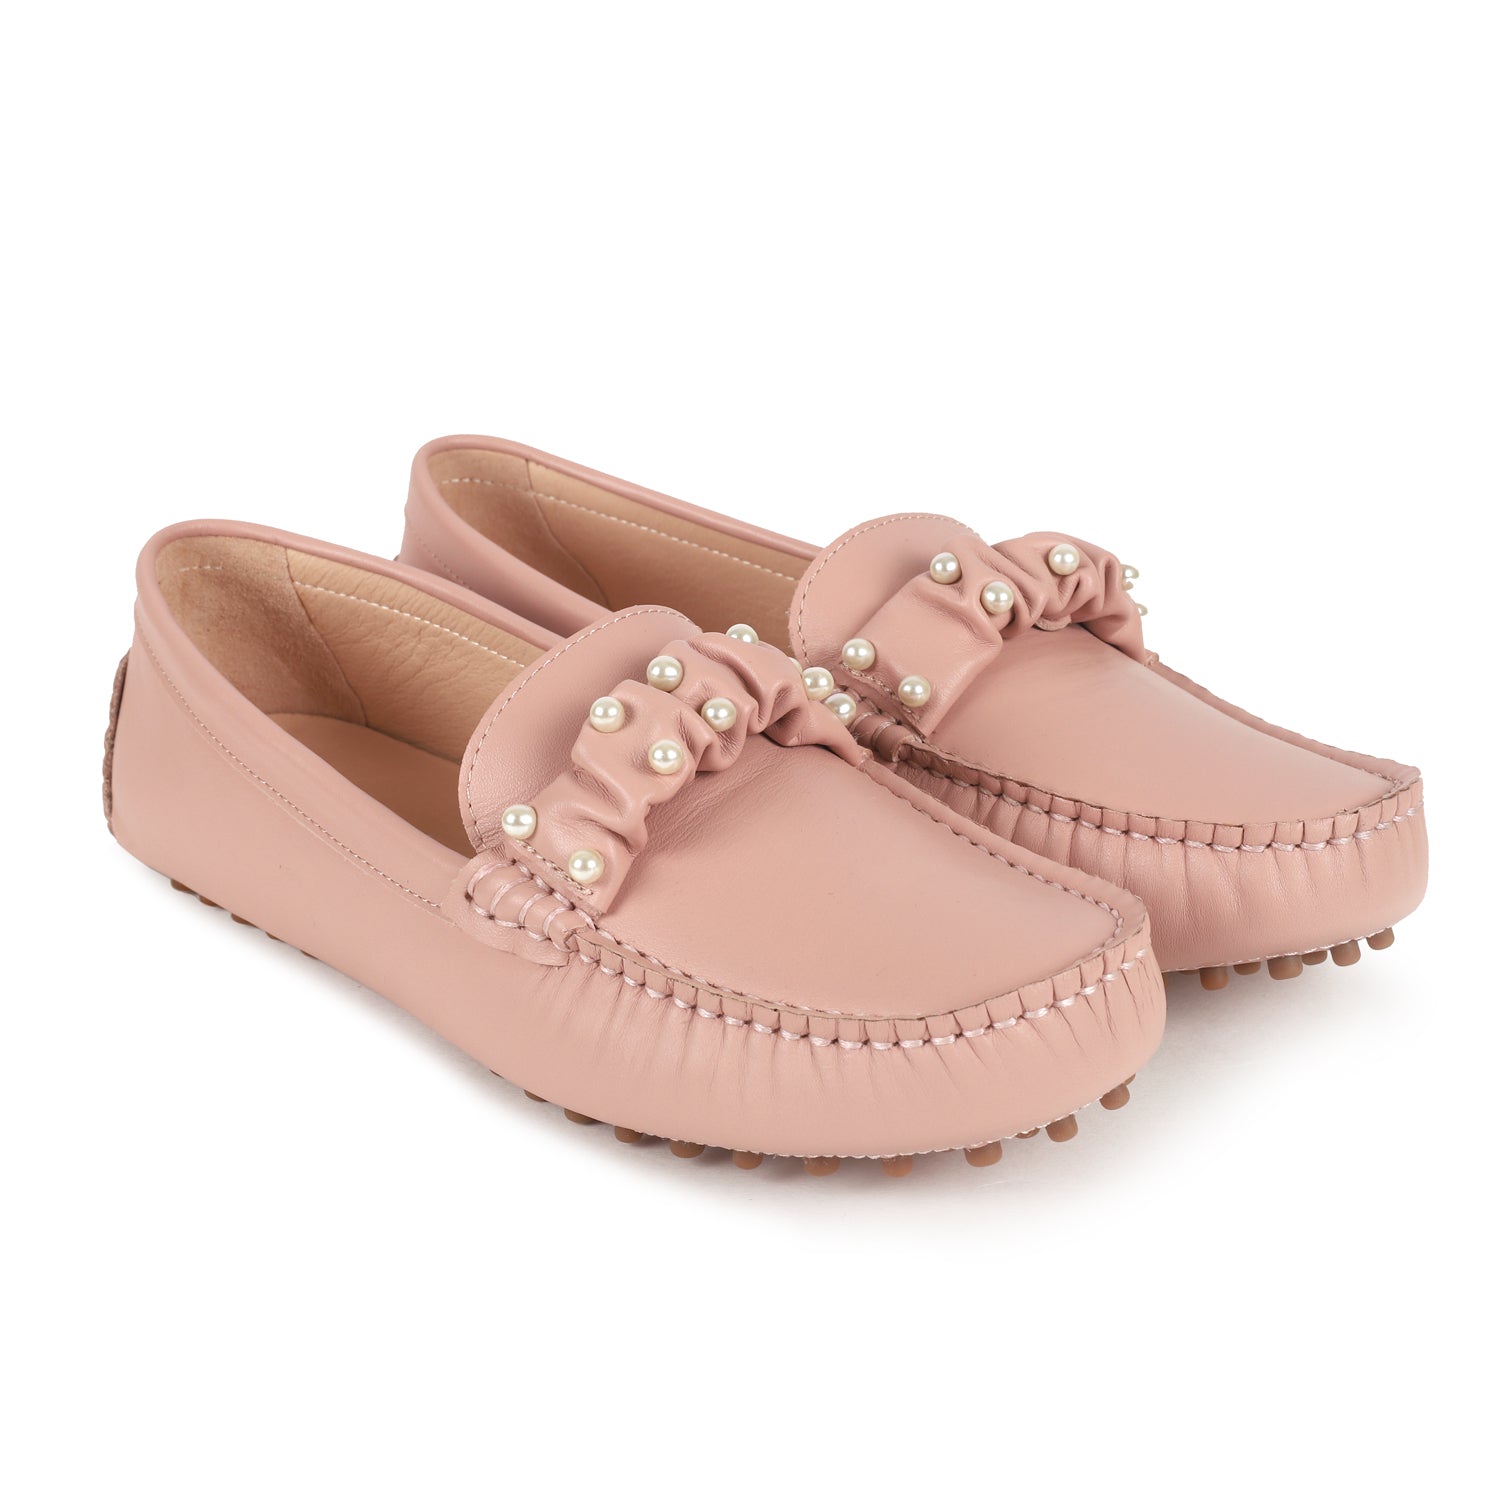 Annalise Rushed Pearl Moccasins